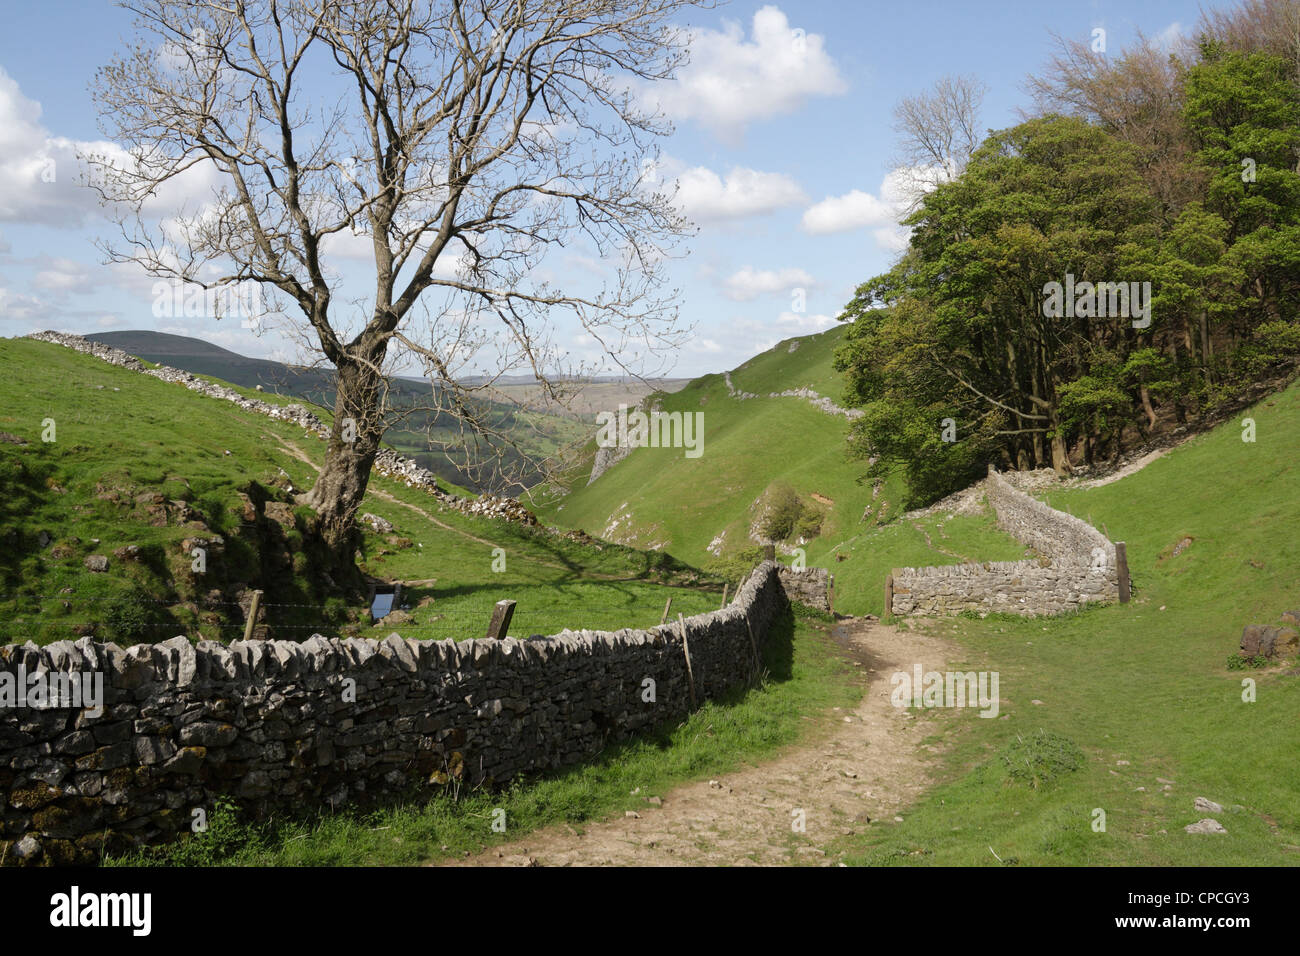 A view looking down in to Cave dale at castleton in Derbyshire, England UK, English Peak District landscape. Limestone gorge National park Stock Photo